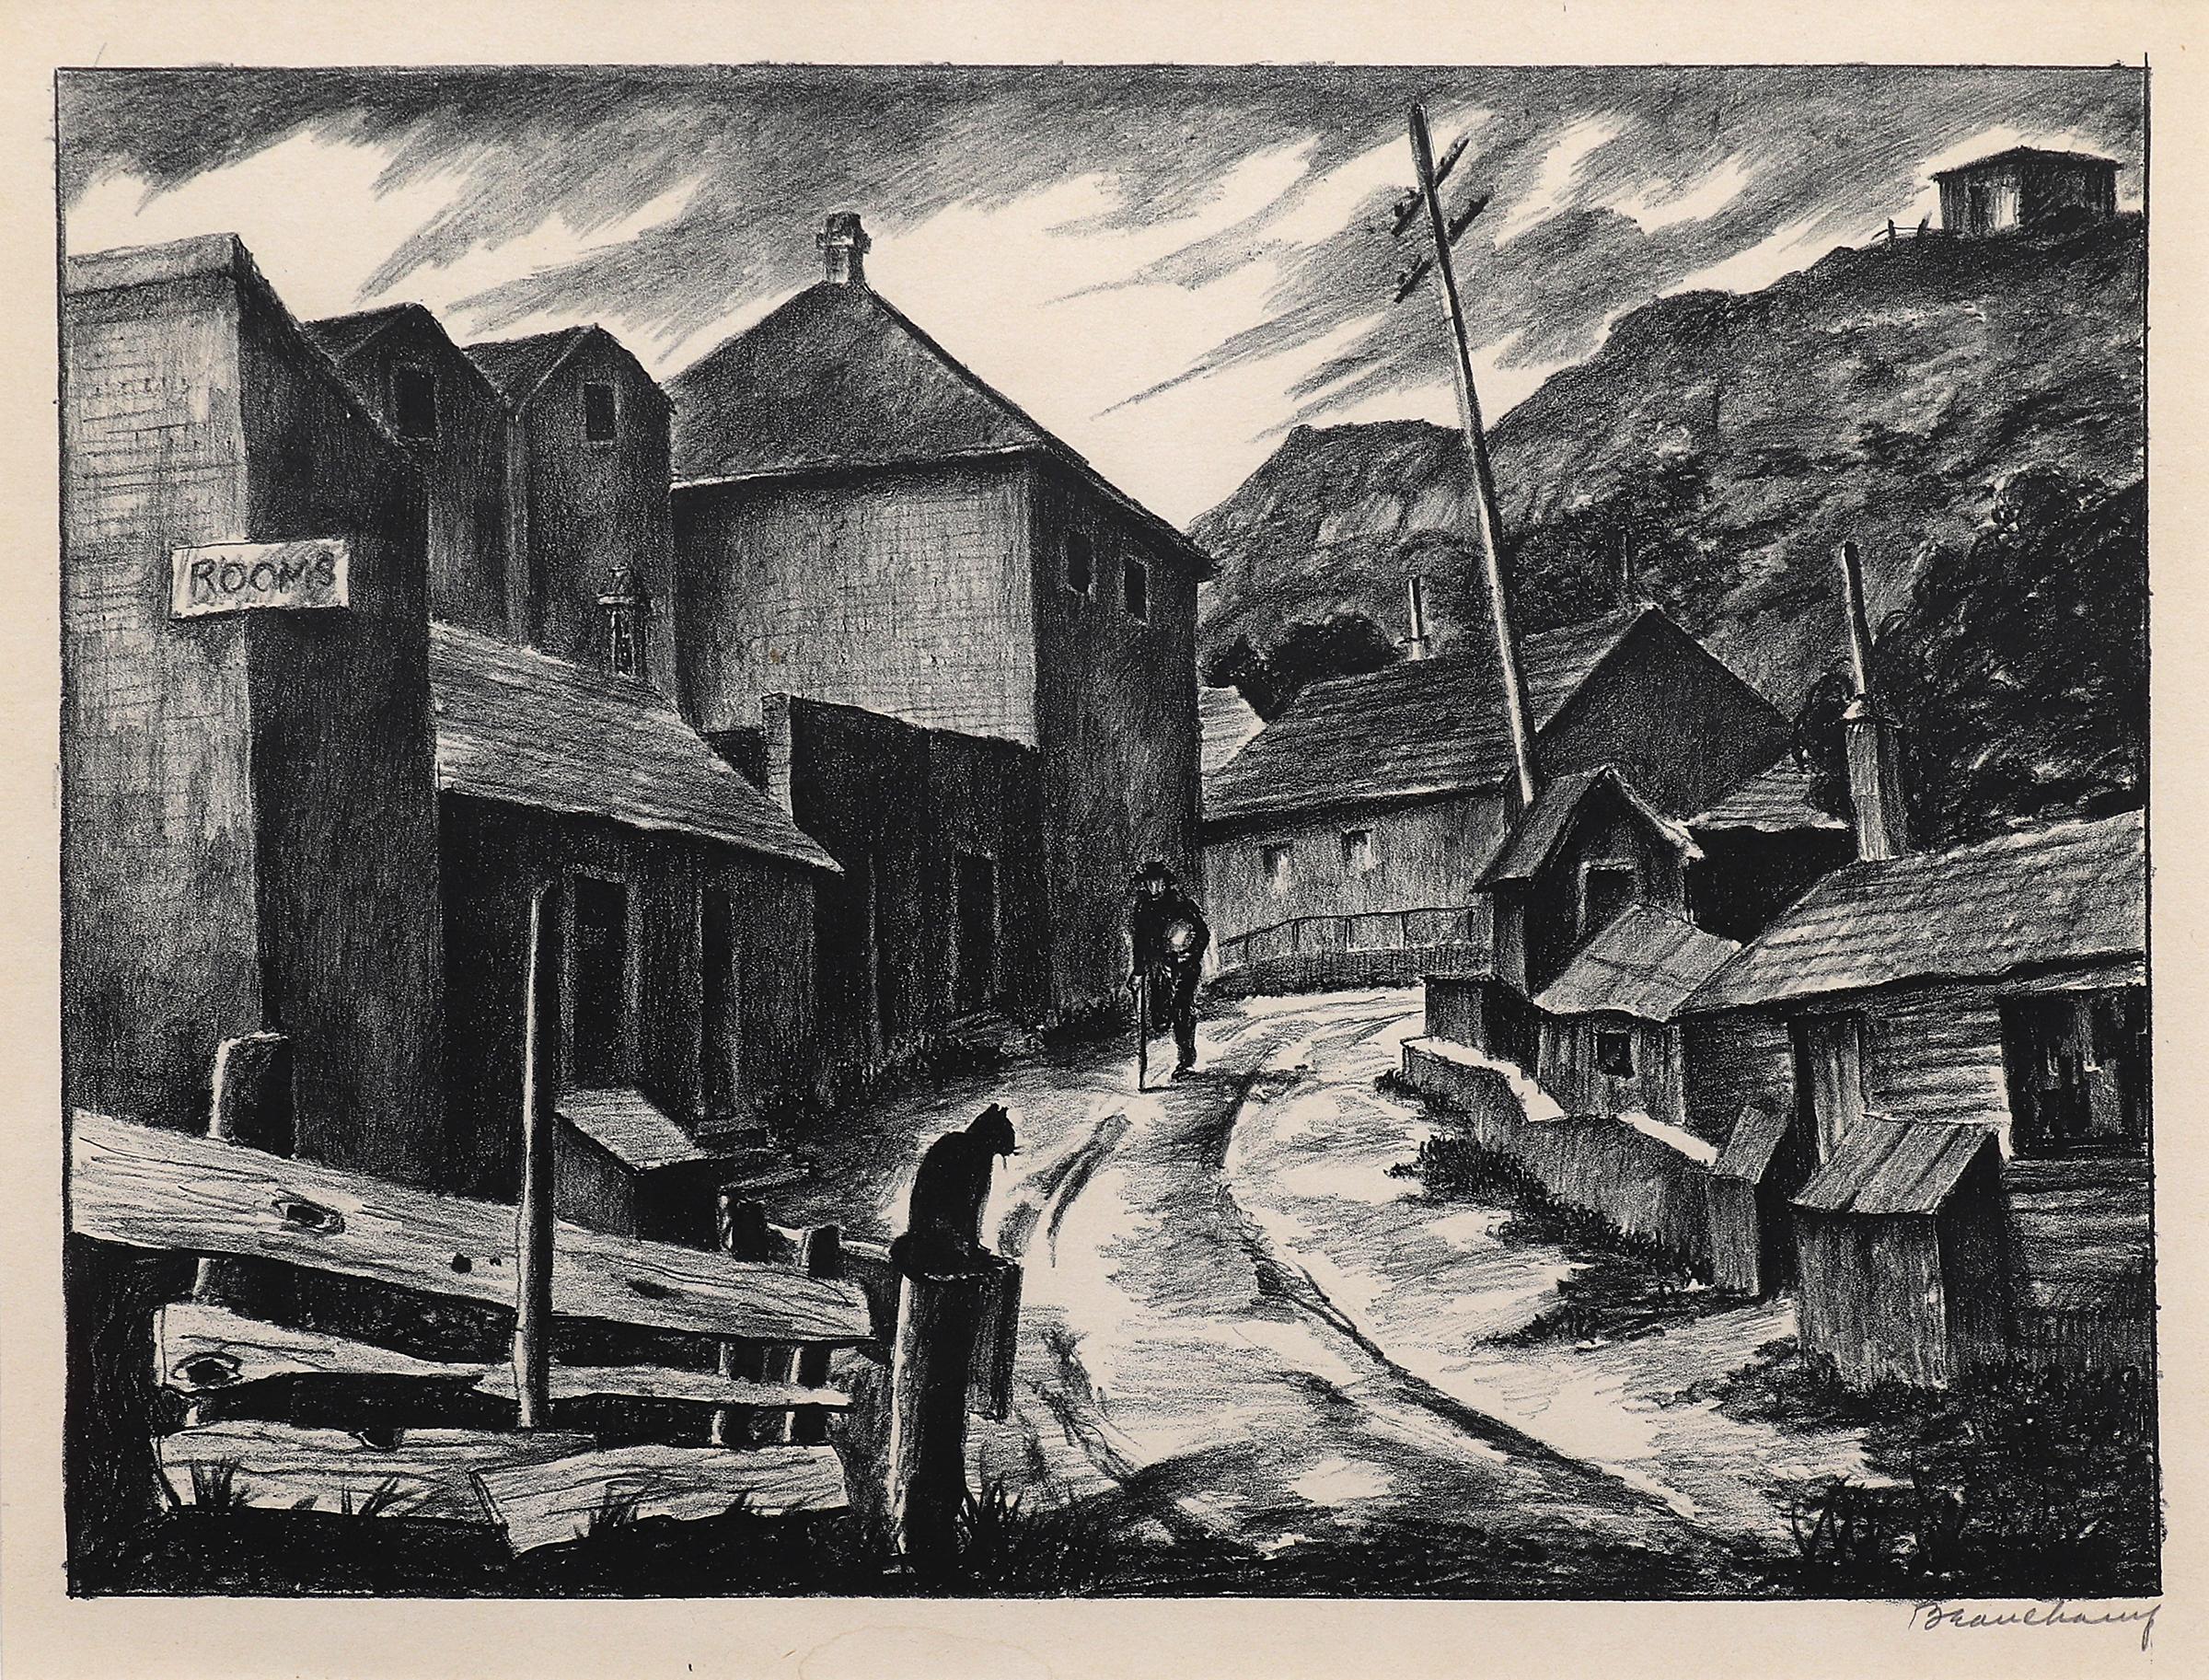 'Mining Town' , American Modern Signed Lithograph, Colorado Mining Town Scene - Print by Robert Beauchamp